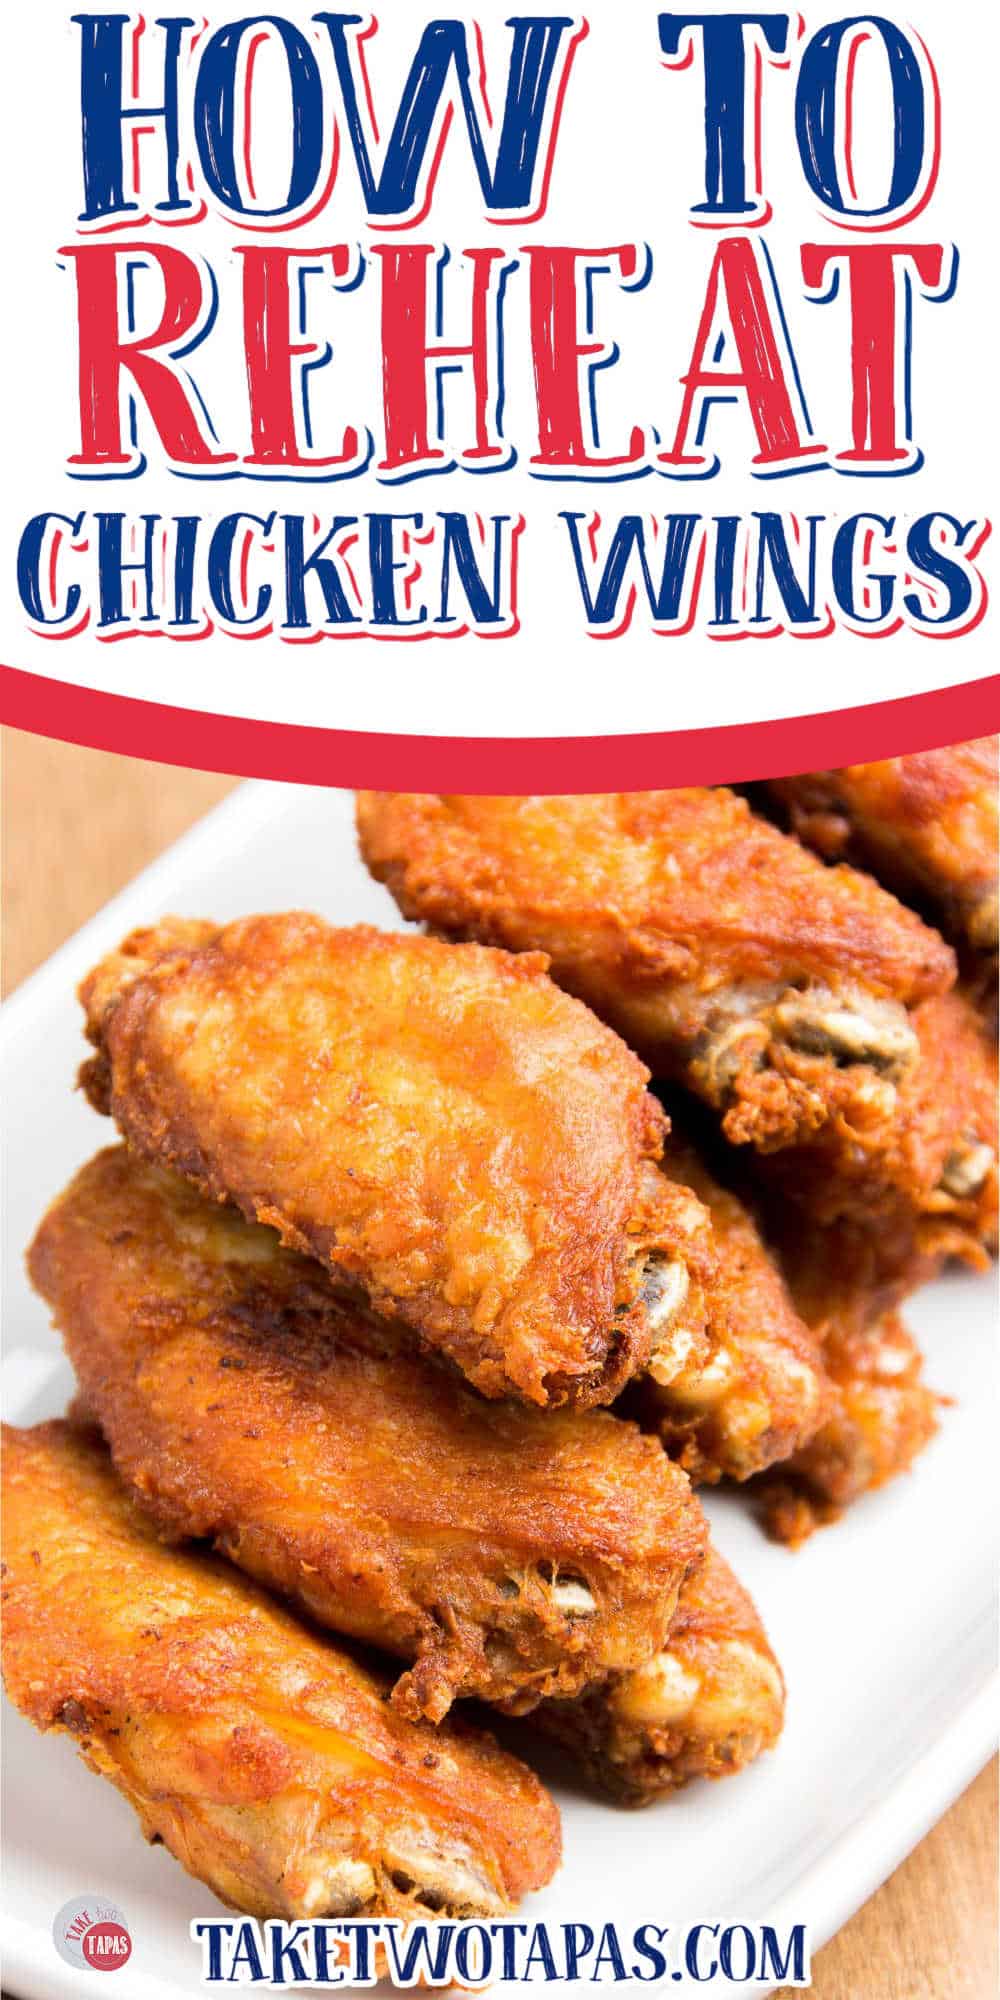 stack of wings with white banner and red text